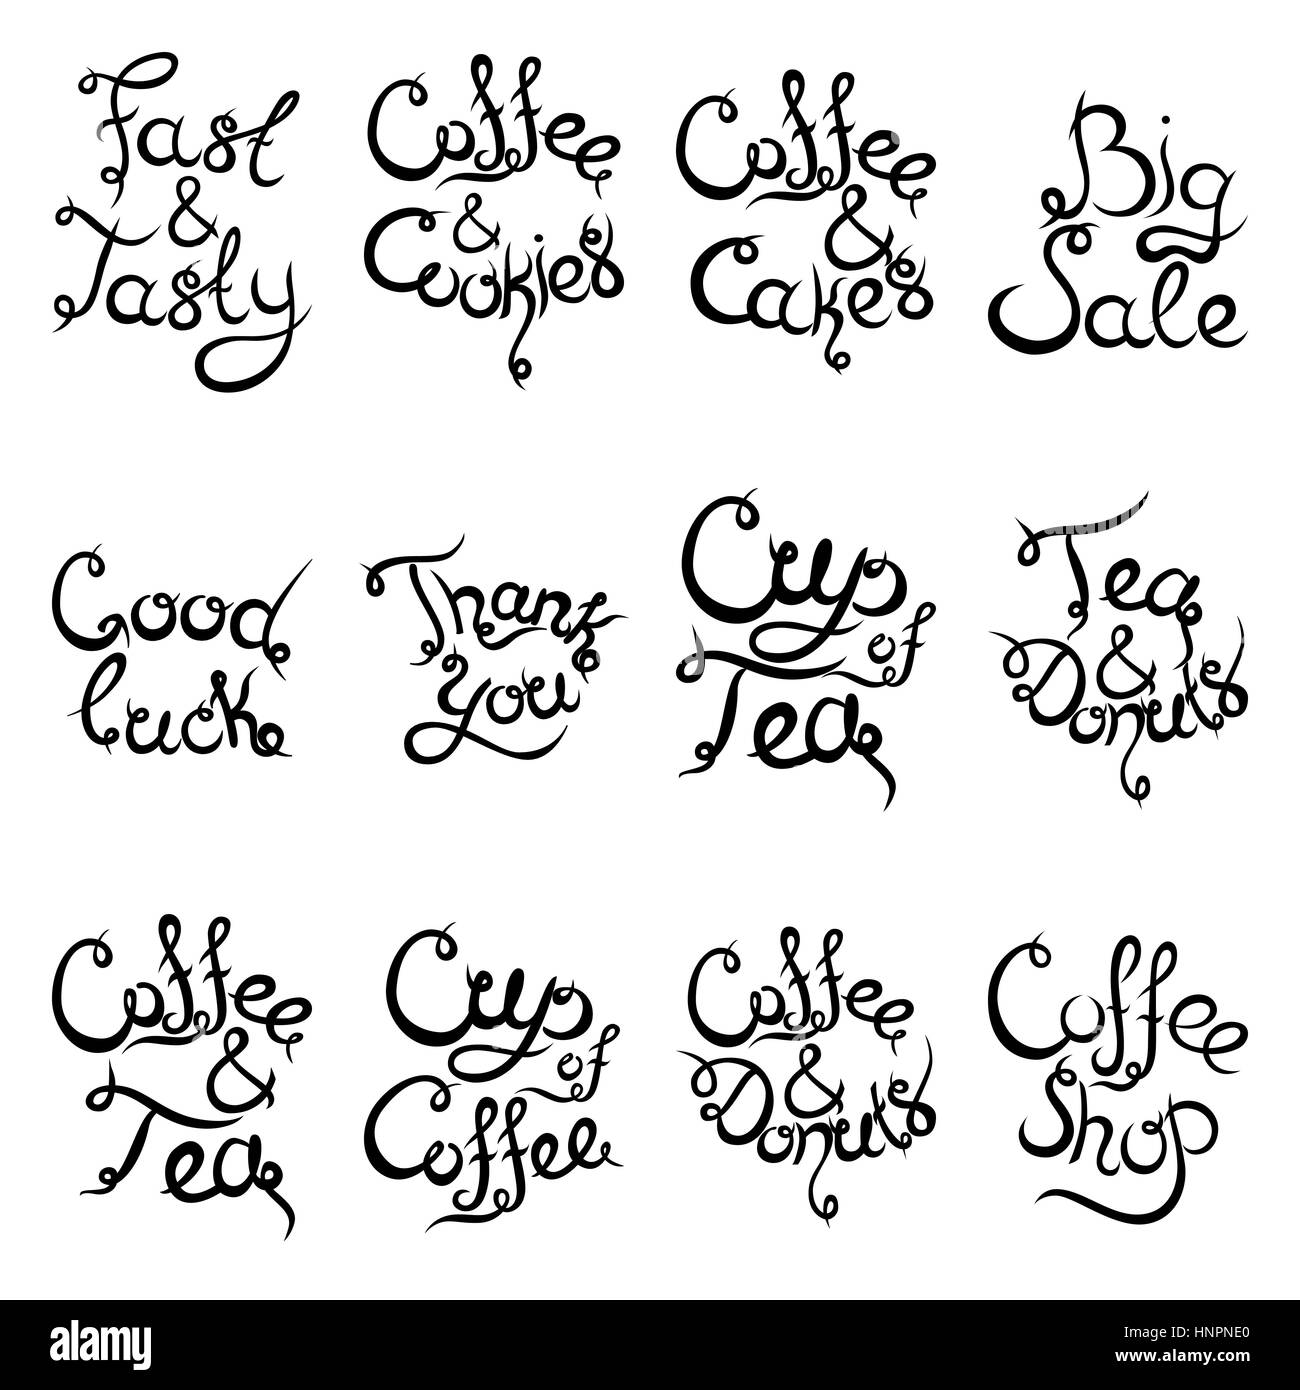 Set 2 of curly hand-drawn lettering Phrases for Coffee Shop. Espresso Cappuccino Cakes Donuts Macarons Cookies Biscuits Latte Macchiatto Cup of Coffee Stock Vector